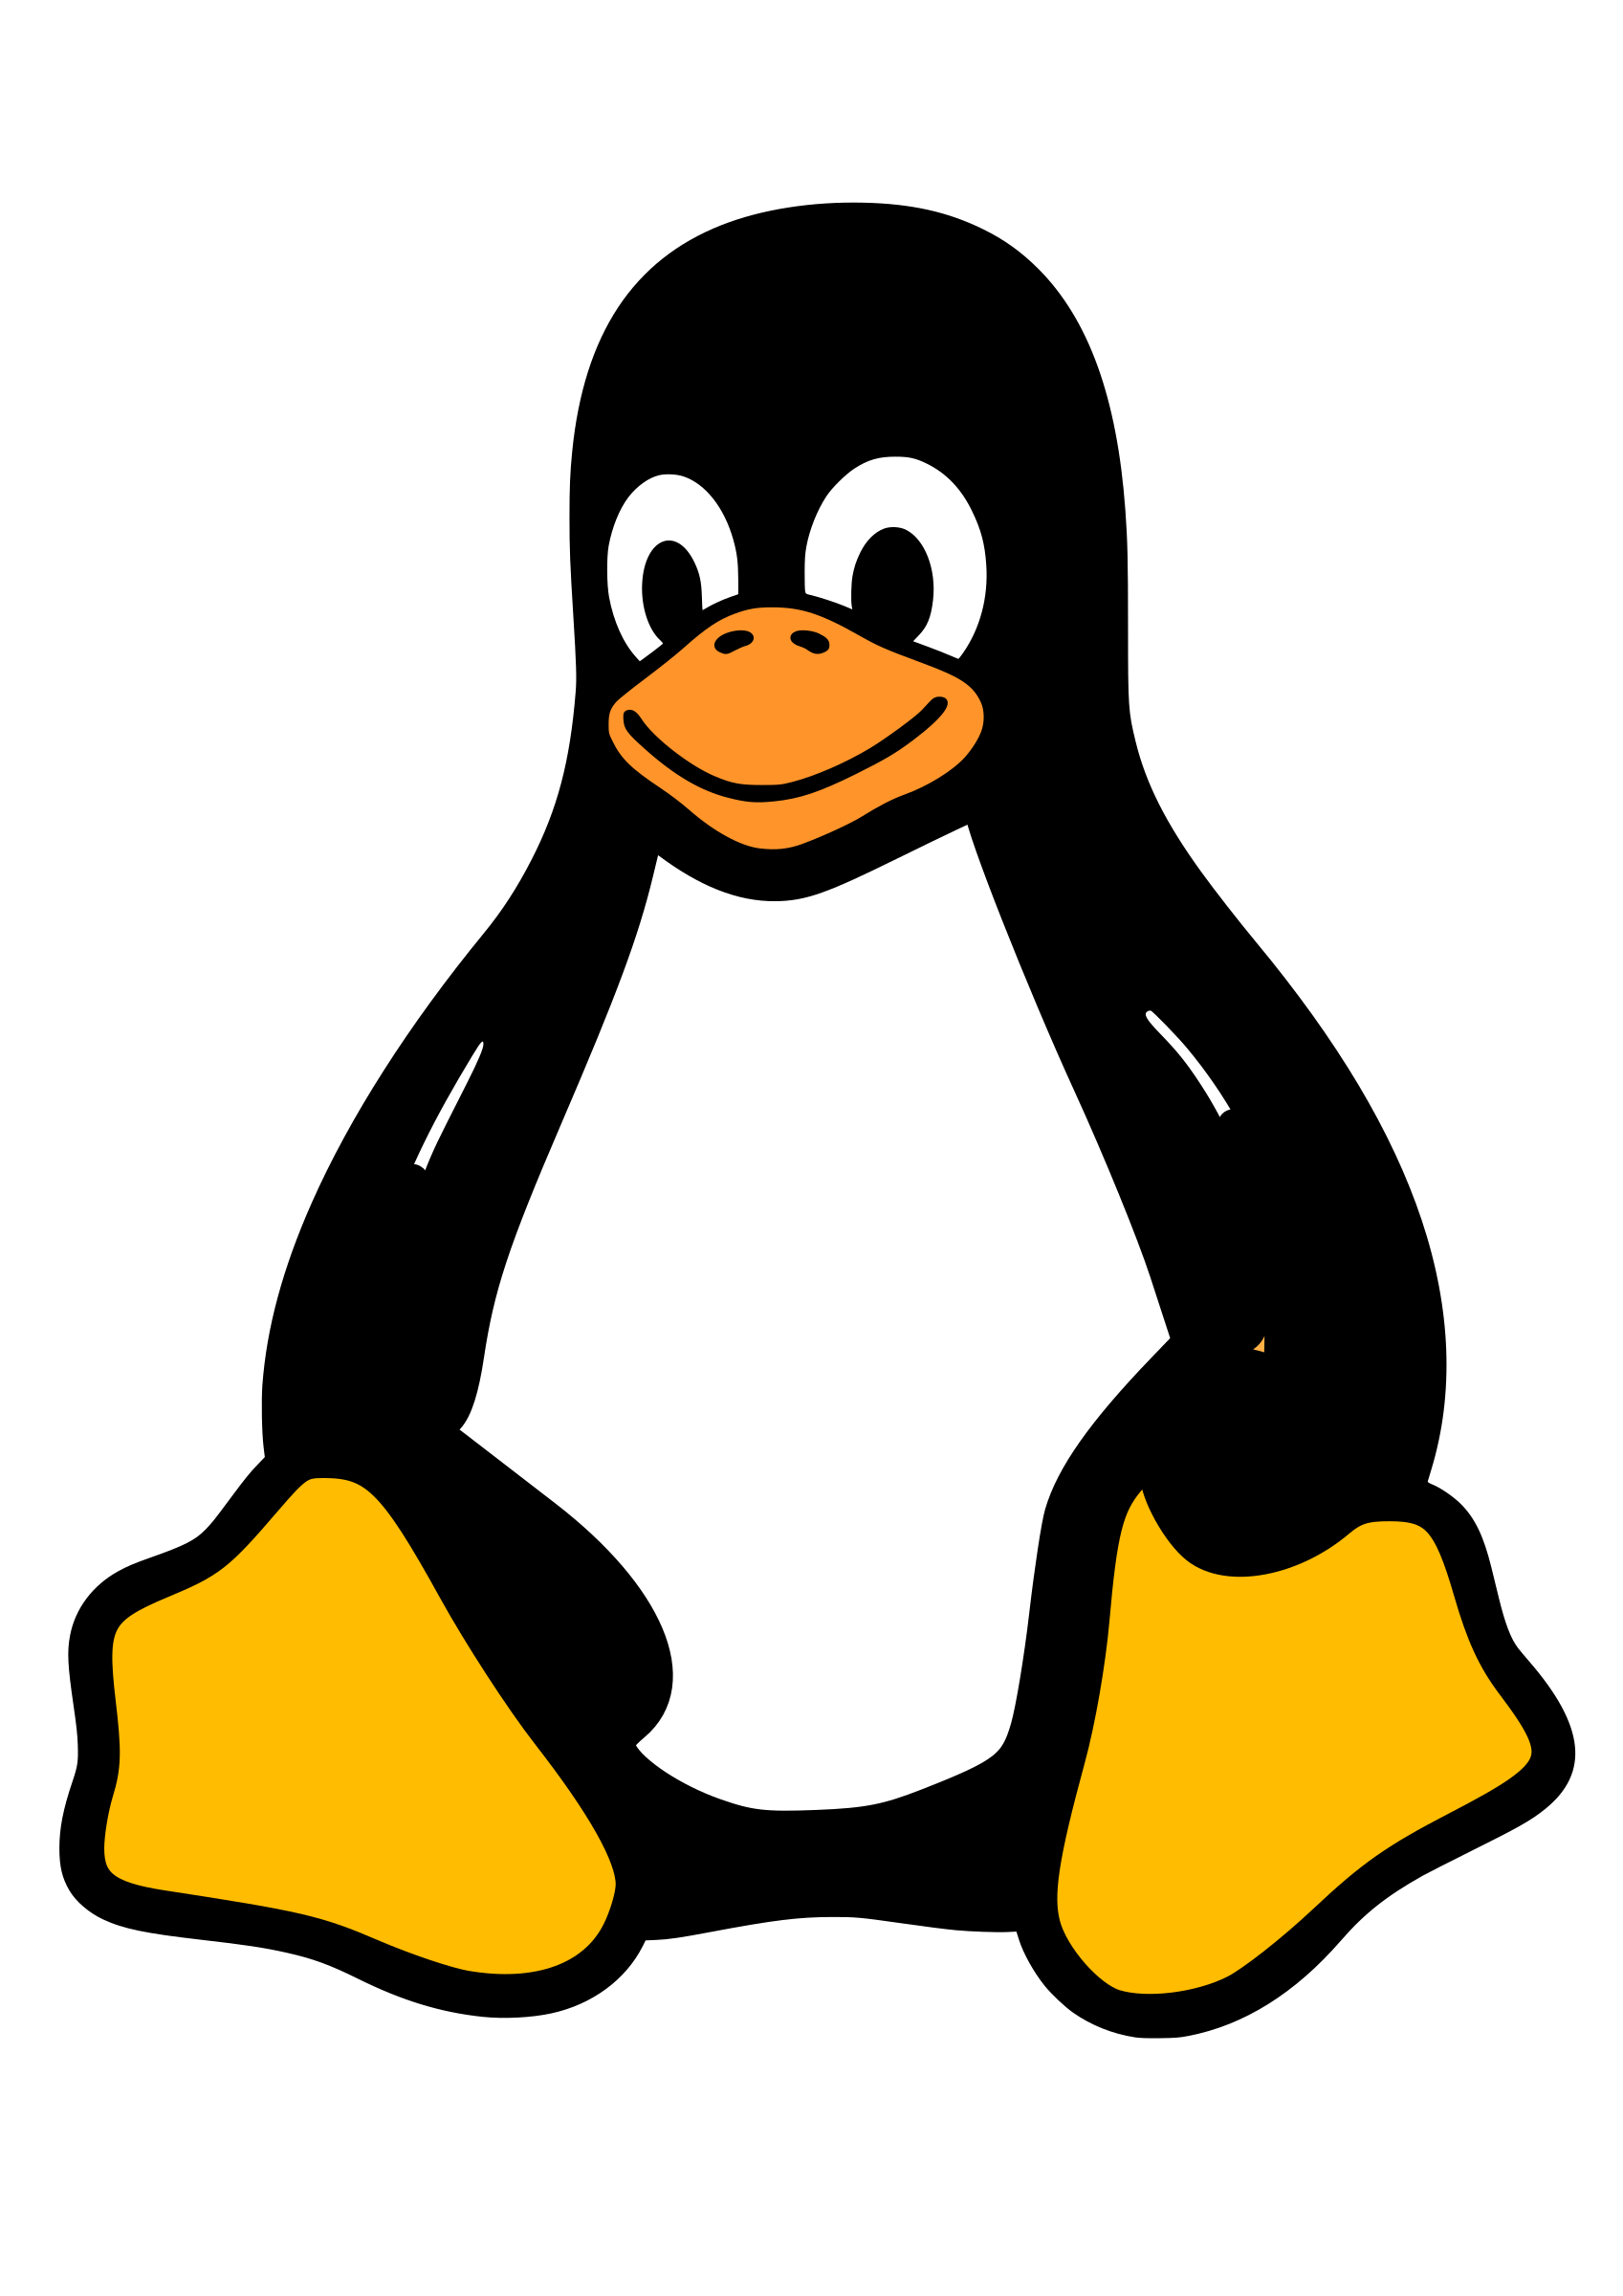 open clipart library linux - photo #40